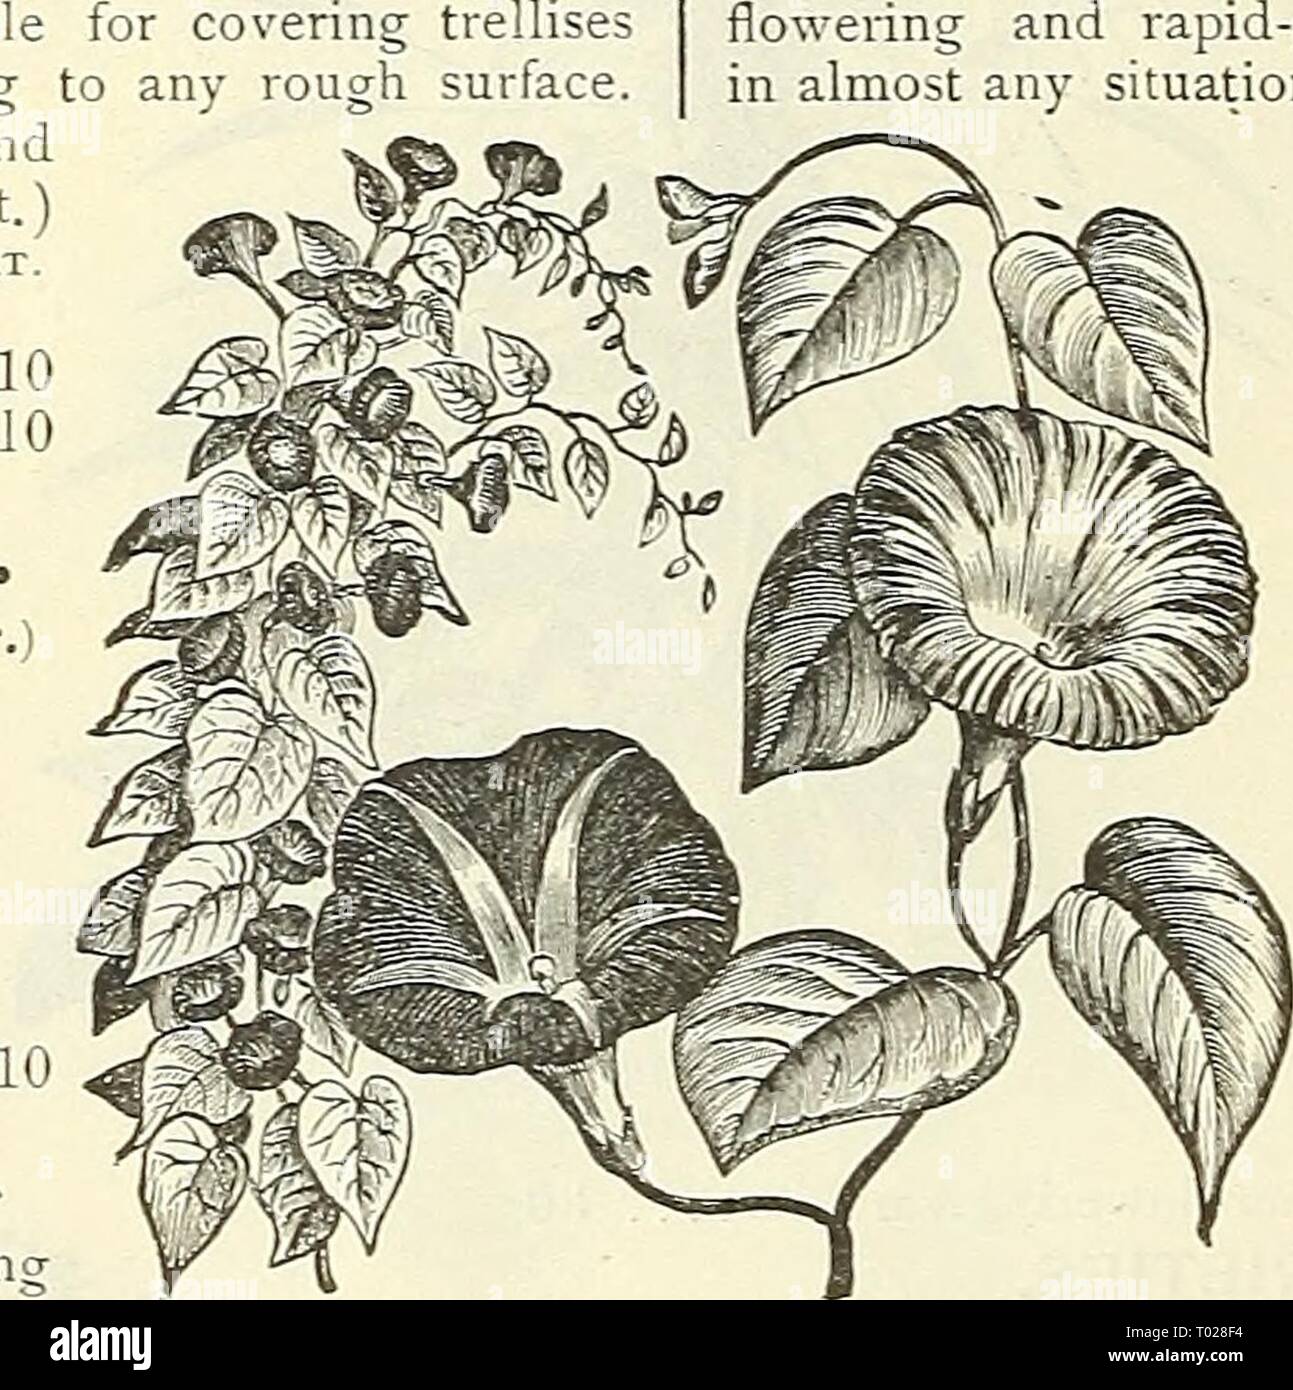 Dreer's garden calendar : 1903 . dreersgardencale1903henr Year: 1903  Coccinea Ikdica. Cob^ea Scandens. COB.EA. (Cups and Saucers Vine). A climber of rapid growth, valuable for covering trellise; arbors, trunks of trees, etc.; will cling to any rough surface In sowing, place seeds edge-wise and merely cover with light soil. (See cut. PER PKT. 2021 Scandens. Large, bell-shaped purple flowers 10 2022 Scandens Alba. Pure white 10 COCCINEA INDICA. (Scarlet Fruited Ivy-Leaved Climber, i 2031 A handsome annual climber of the gourd species, with beauti- ful, smooth, glossy, ivy-like leaves, contrasti Stock Photo